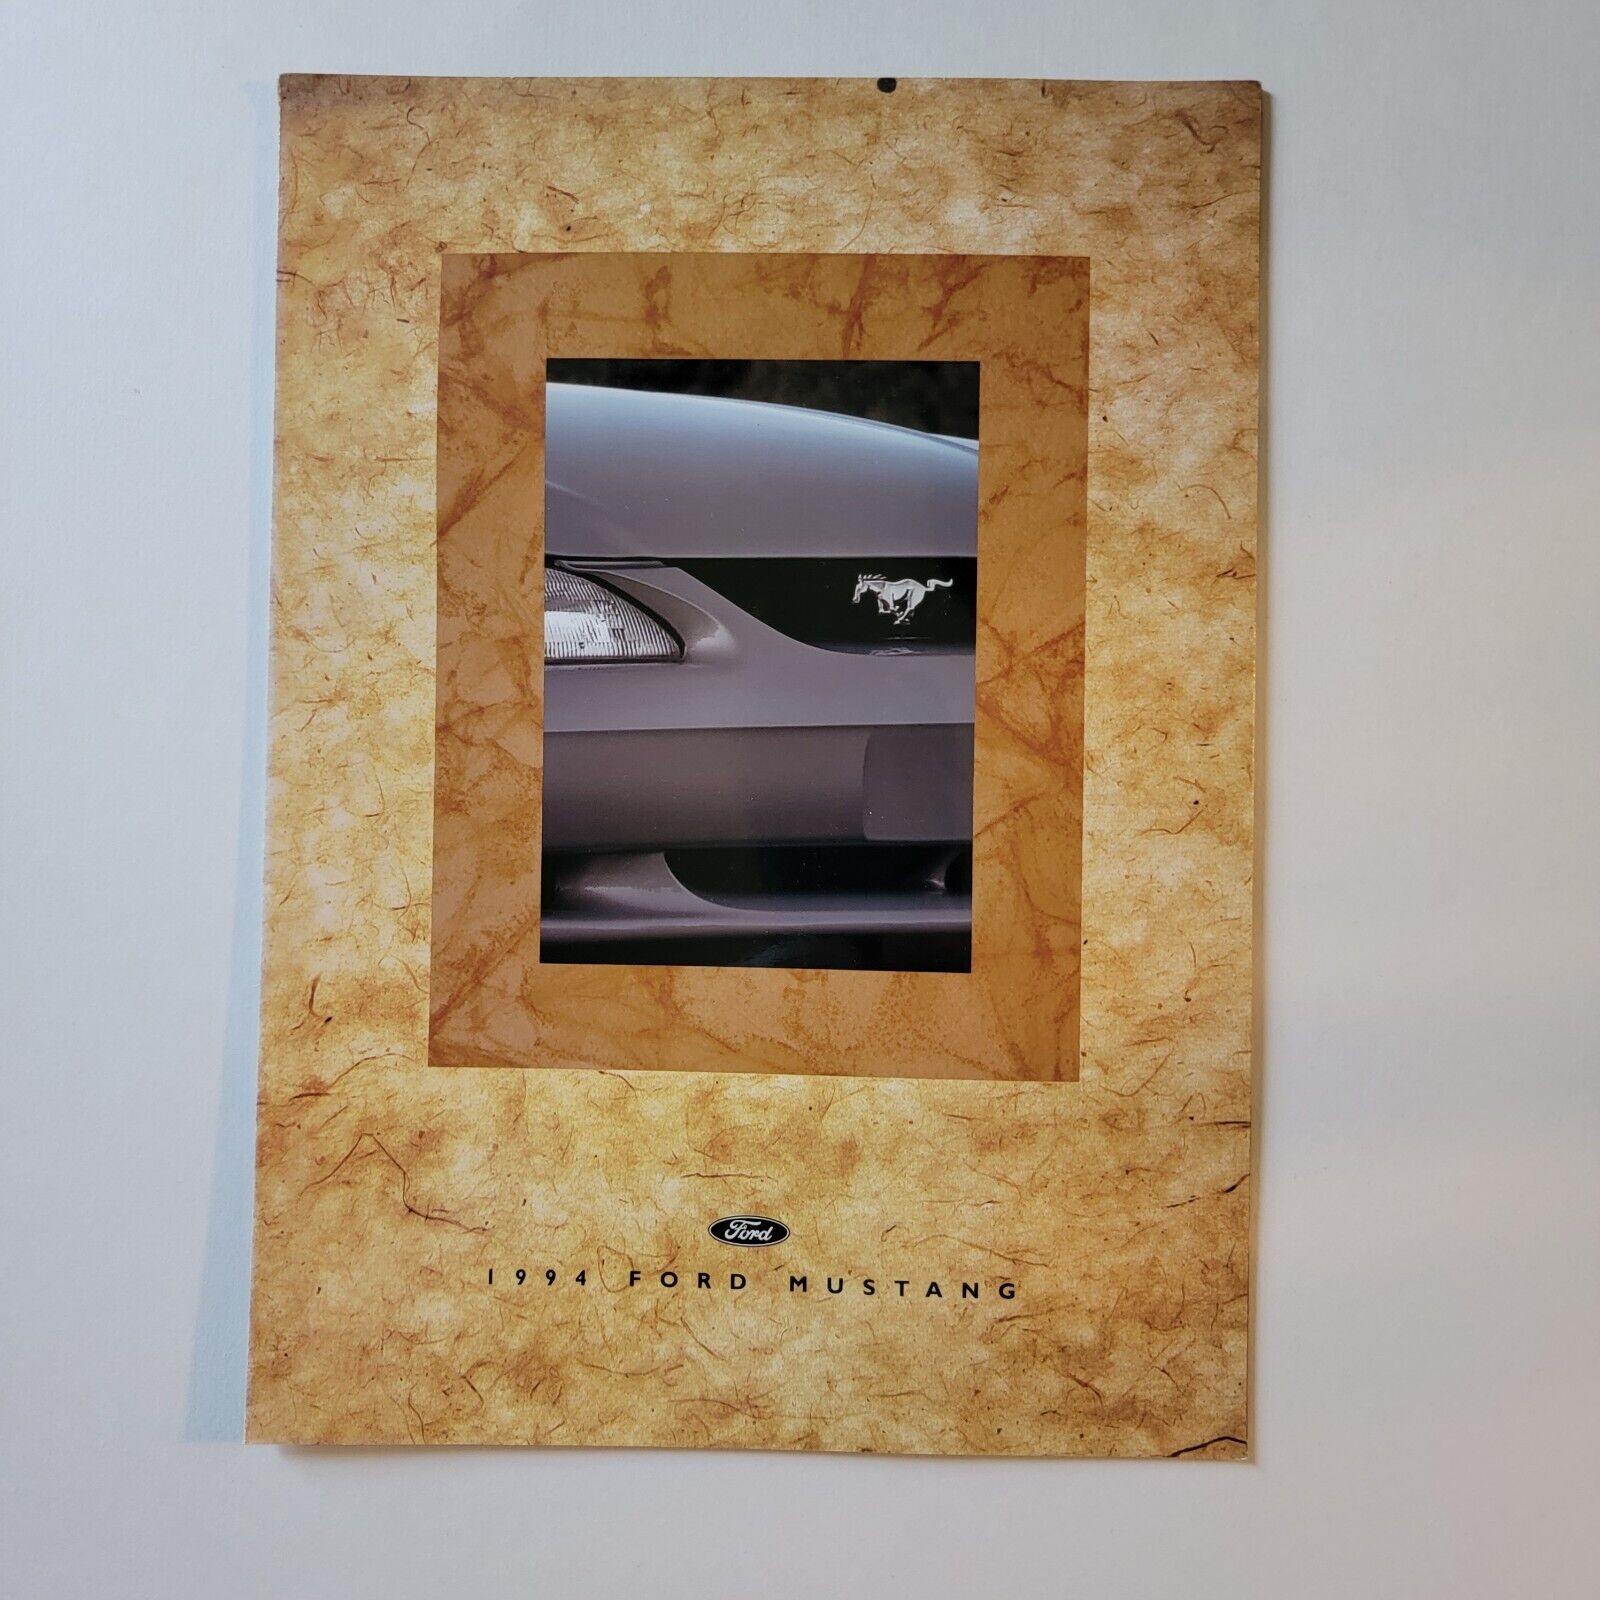 RARE 1994 Ford Mustang dealership color sales brochure Good Condition see photos